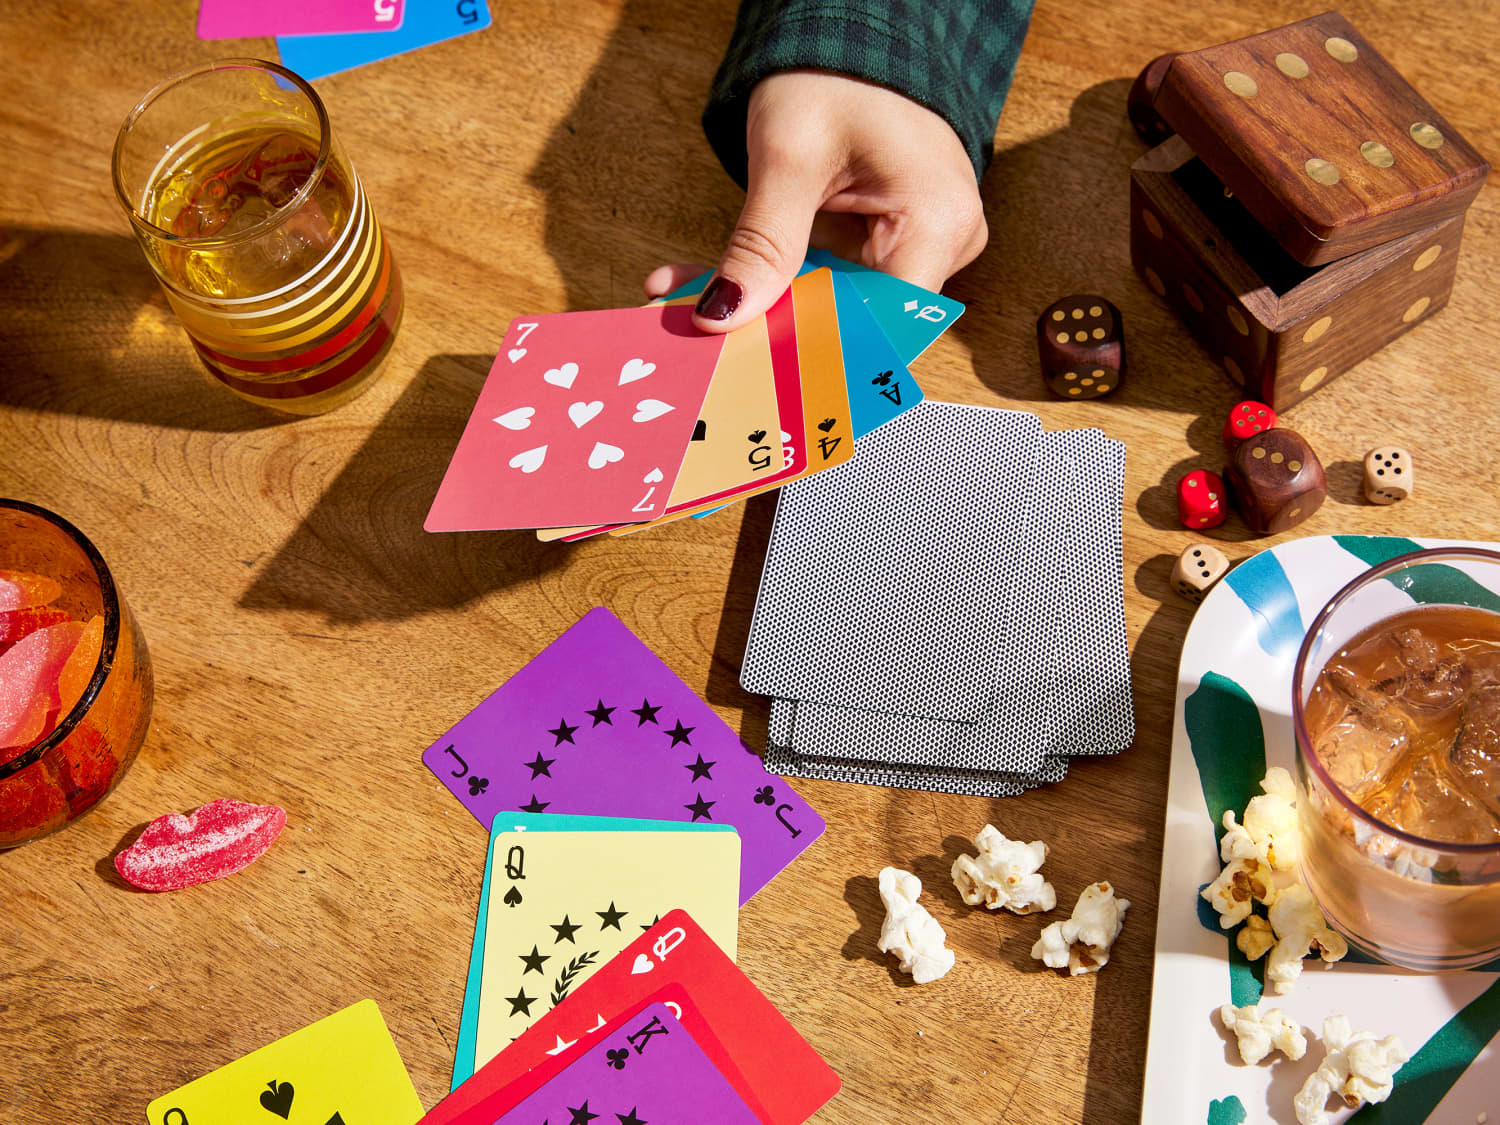 10 Popular Card Games to Play with Friends Anytime